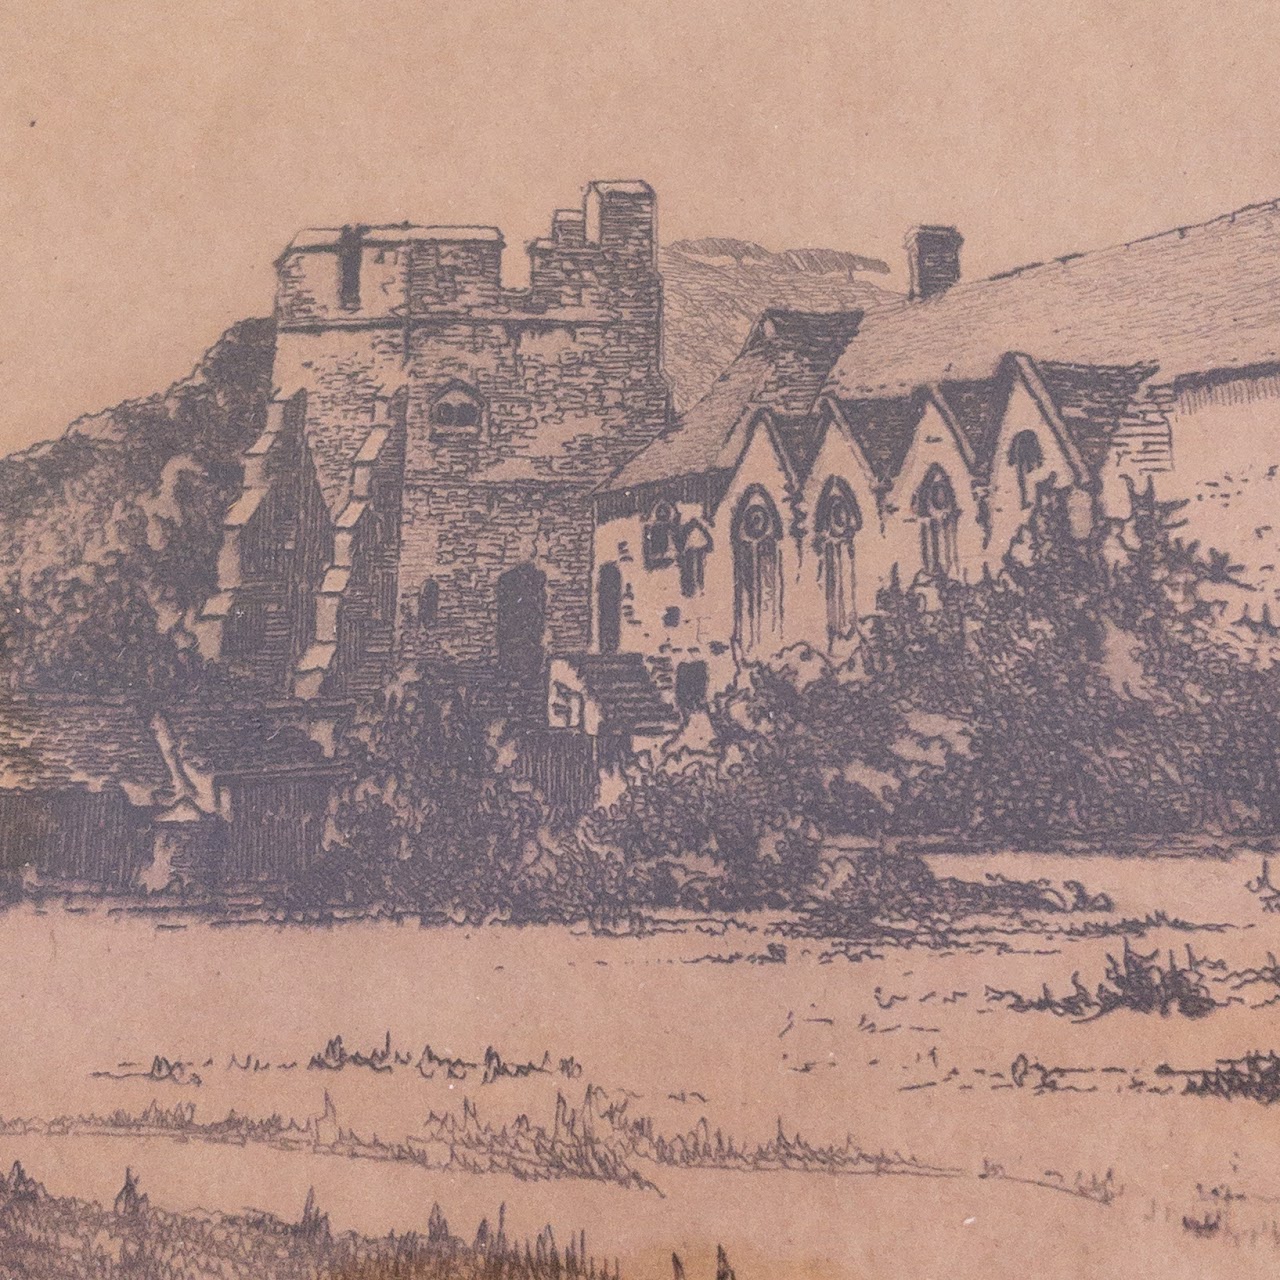 Stokesay Castle Signed Etching